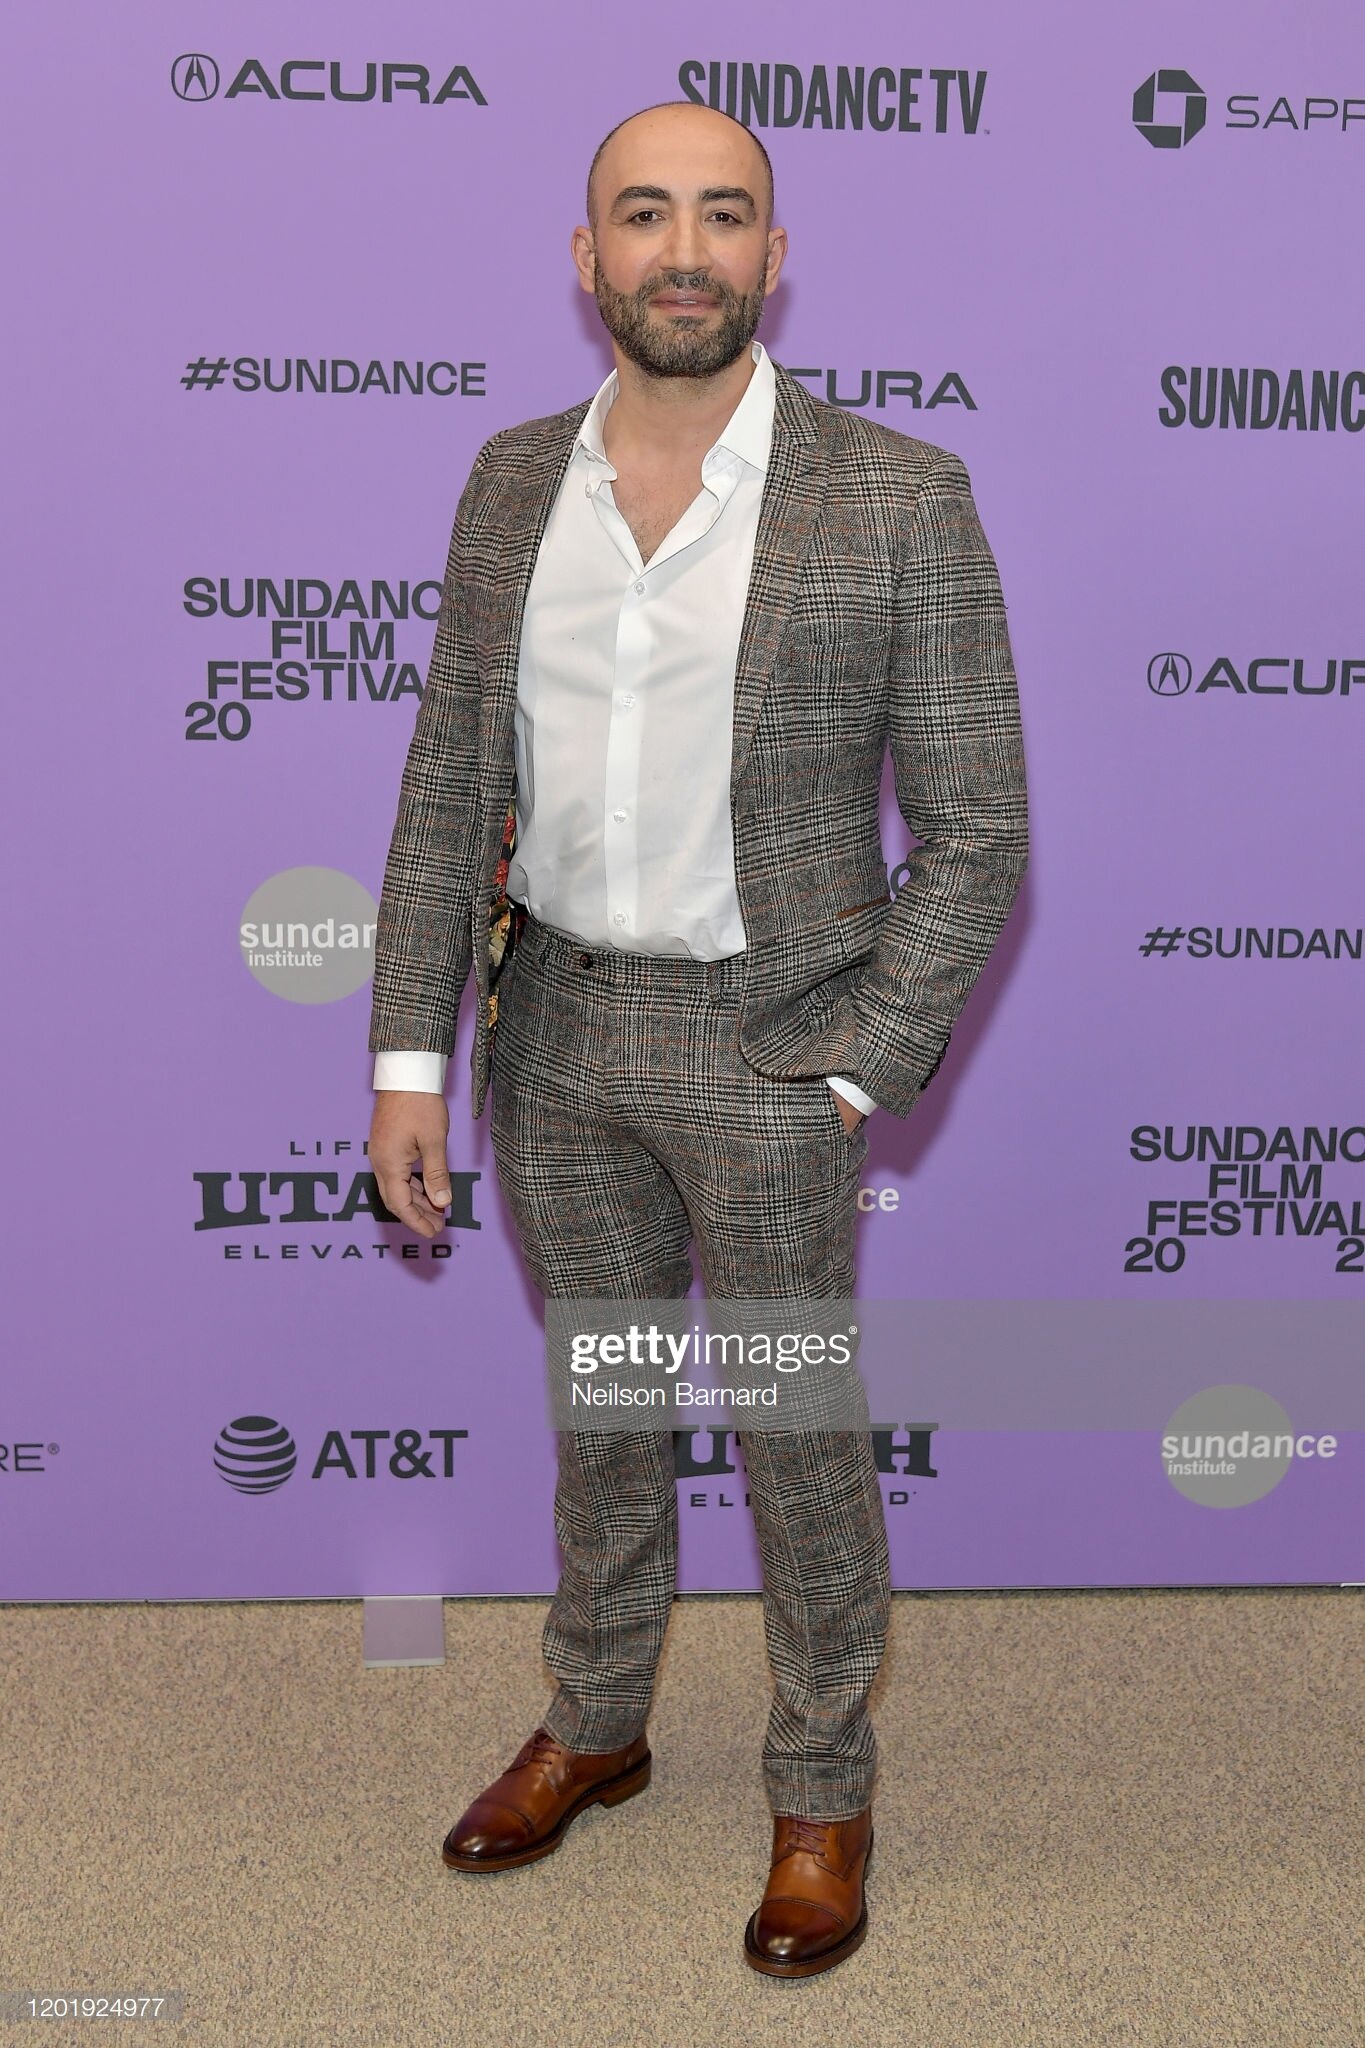 gettyimages-1201924977-2048x2048.jpg